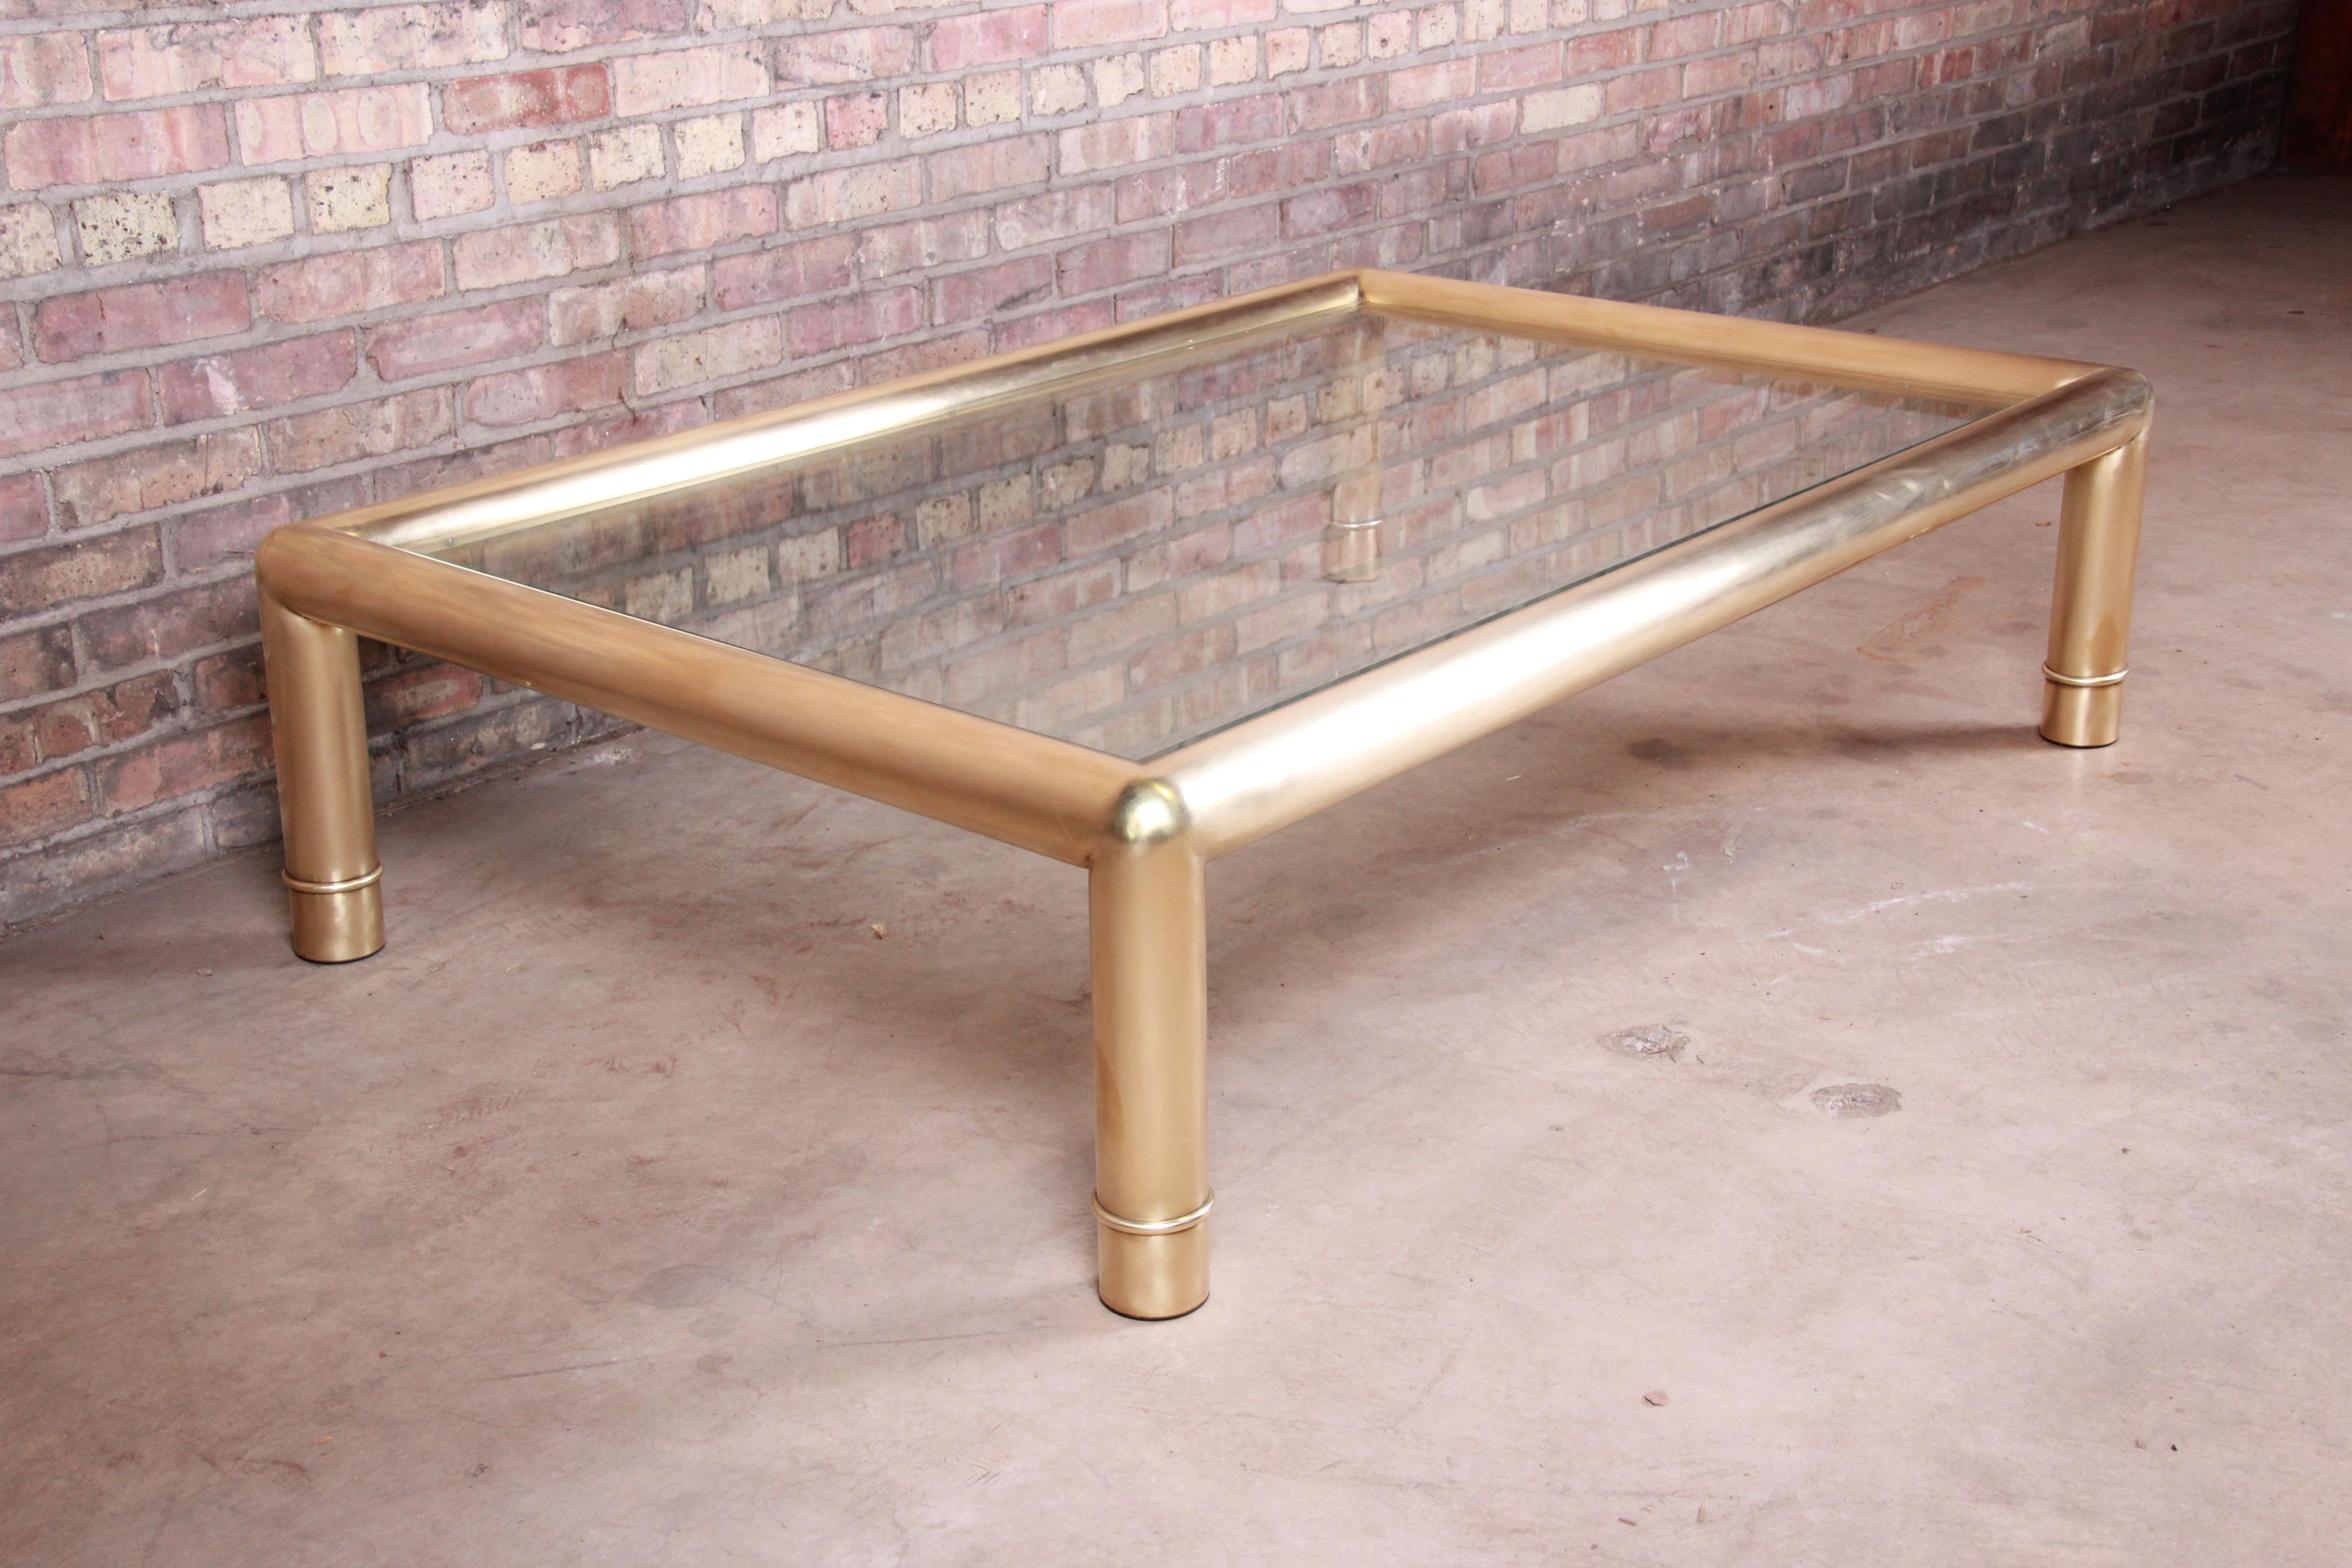 American Mastercraft Monumental Hollywood Regency Brass and Glass Cocktail Table